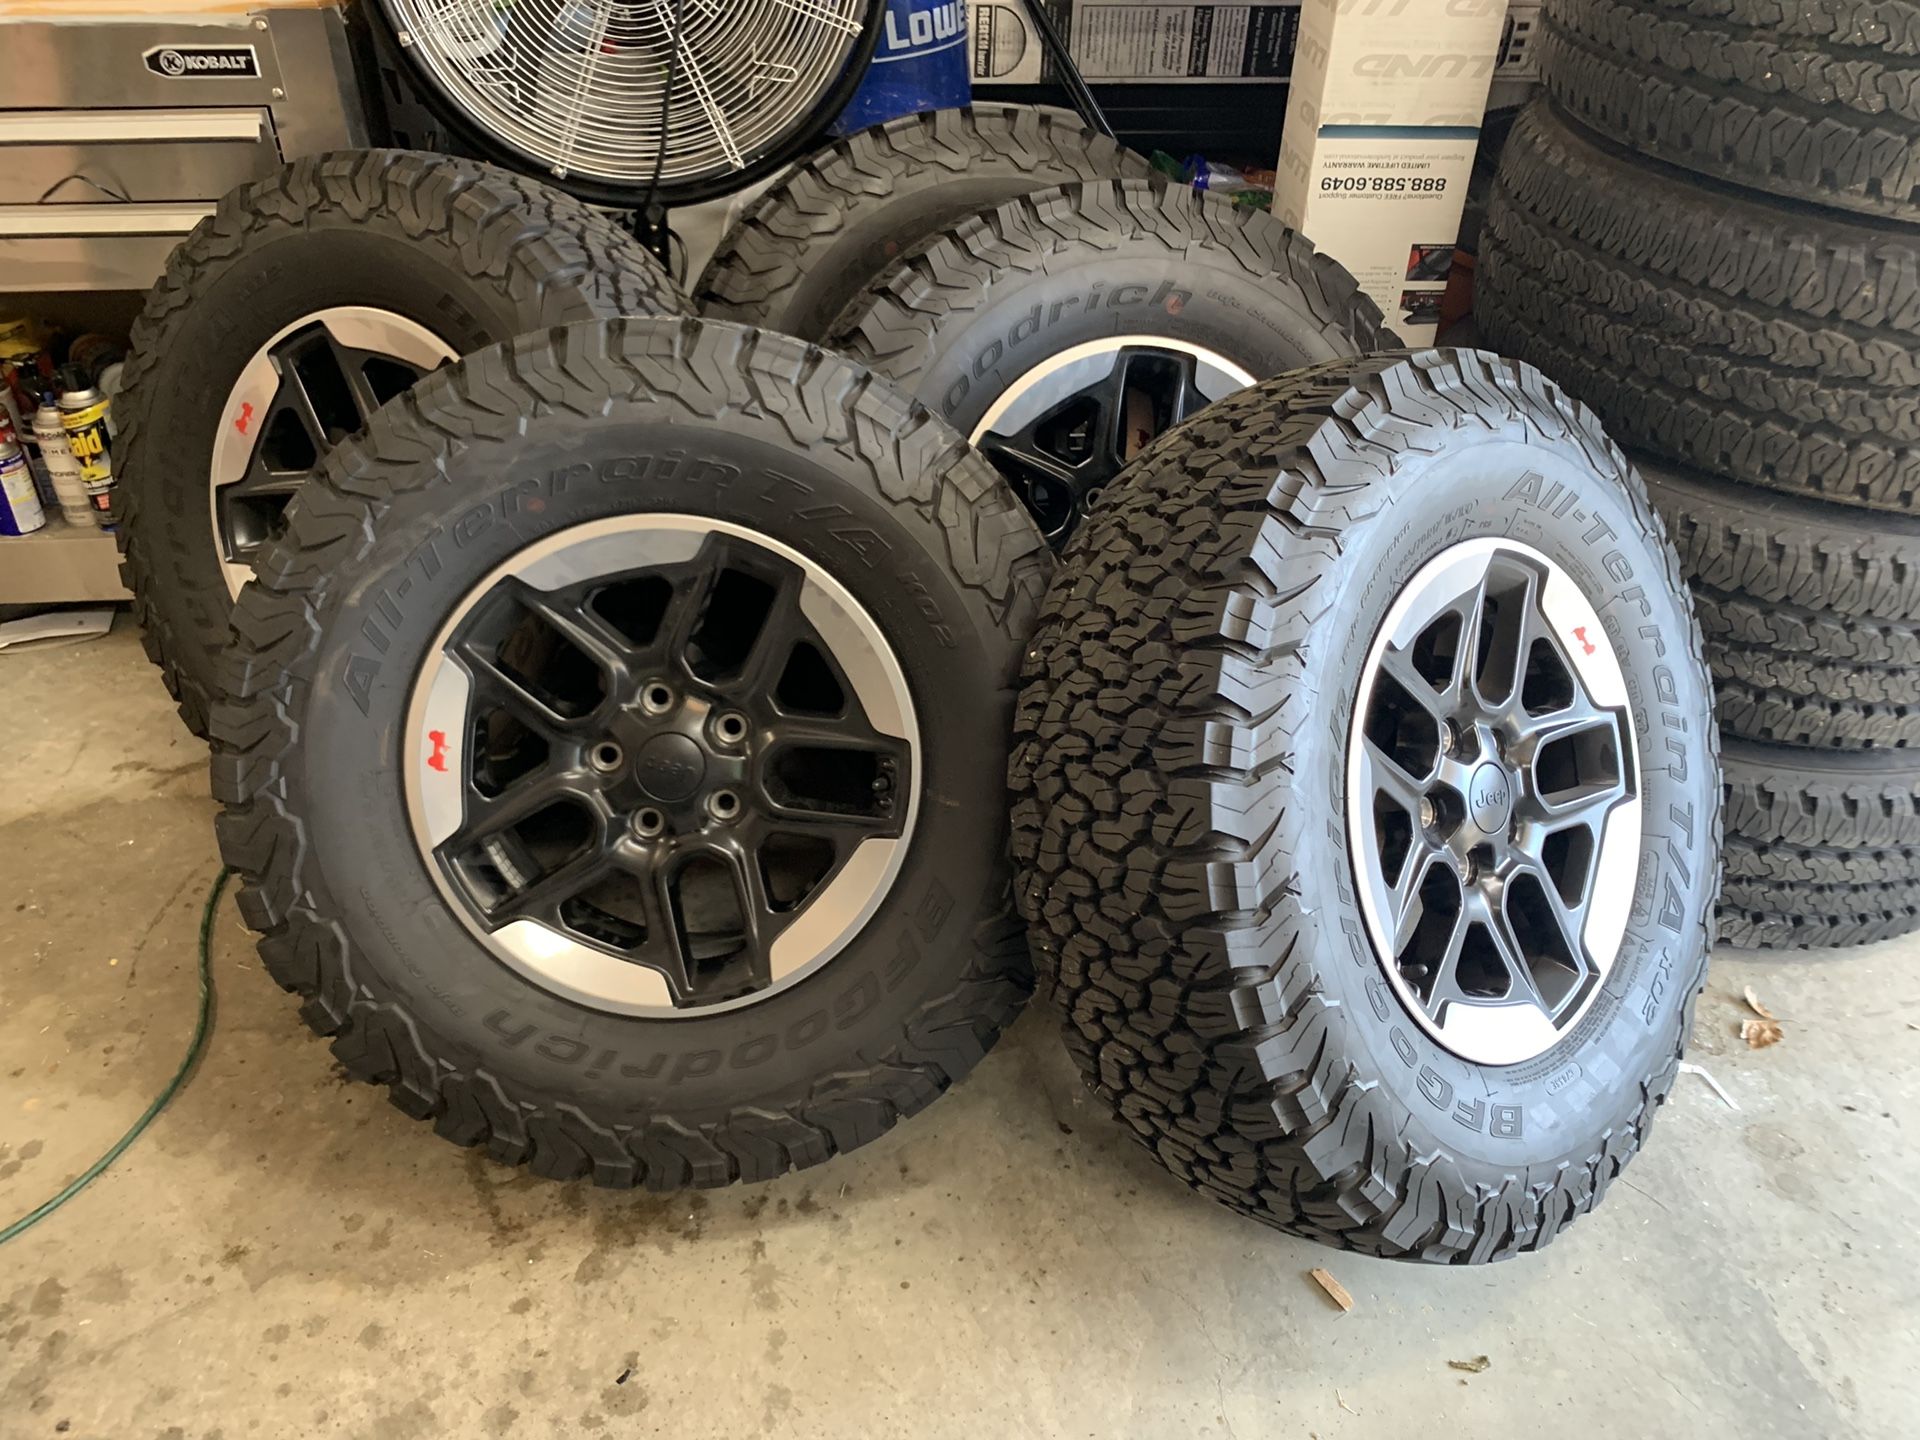 2018 Jeep Rubicon 5 wheels and tires OEM under 500 miles driven on tires